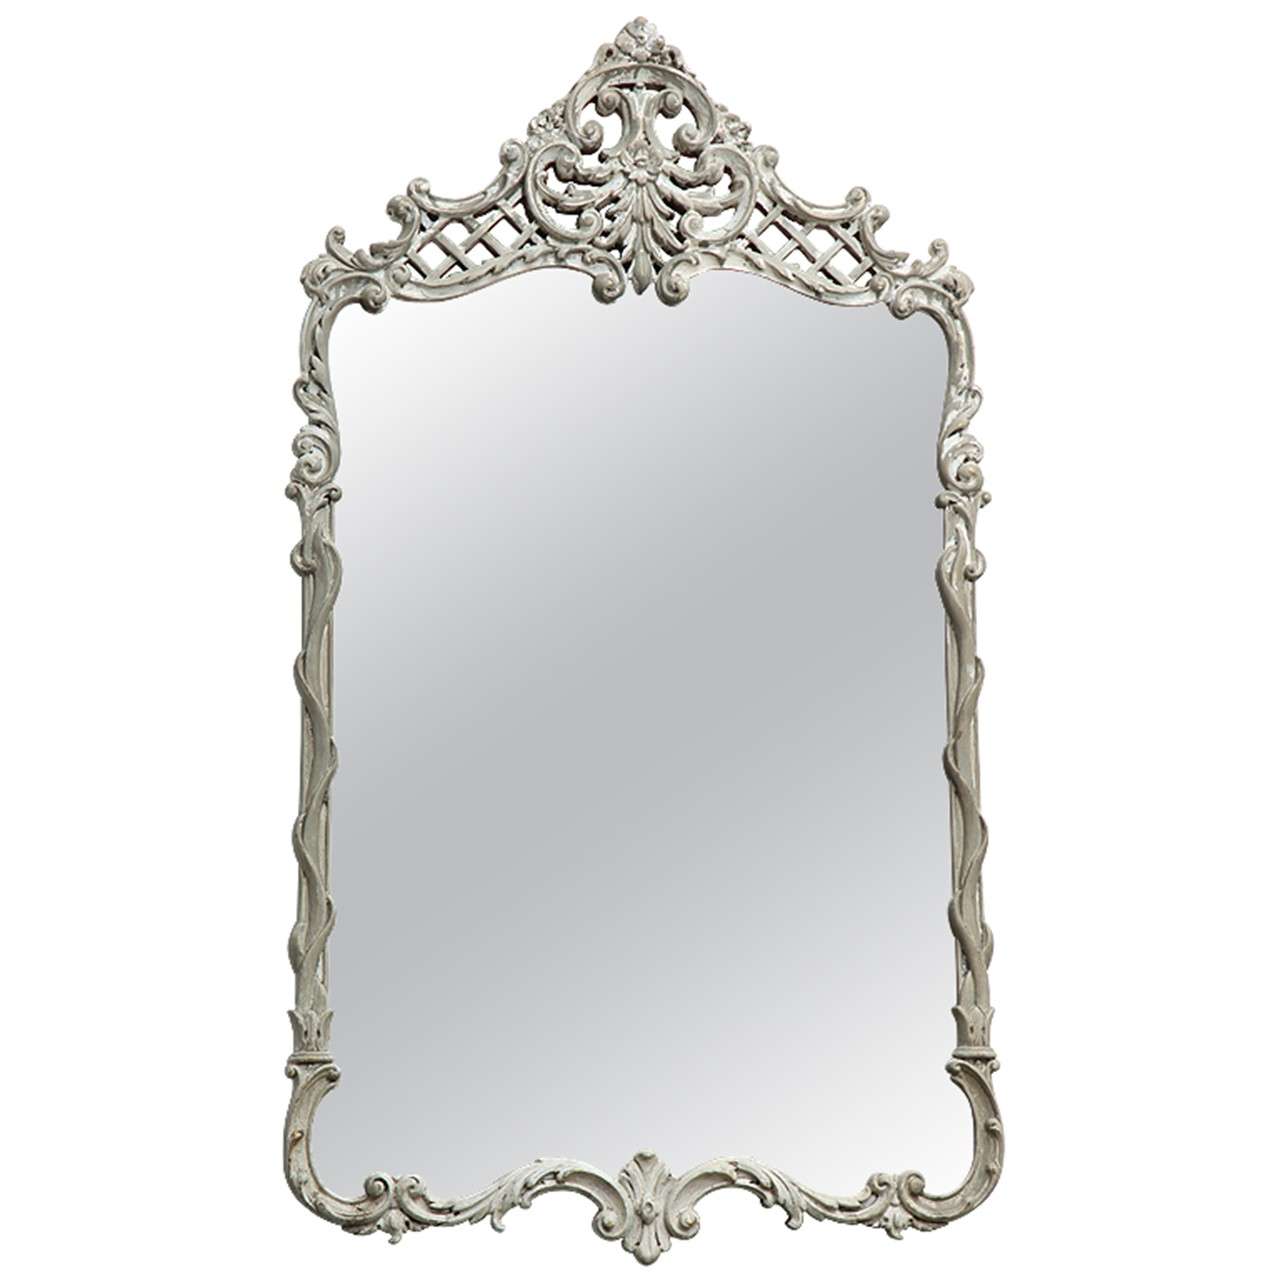 French Rococo Overmantel Grey Mirror at 1stdibs